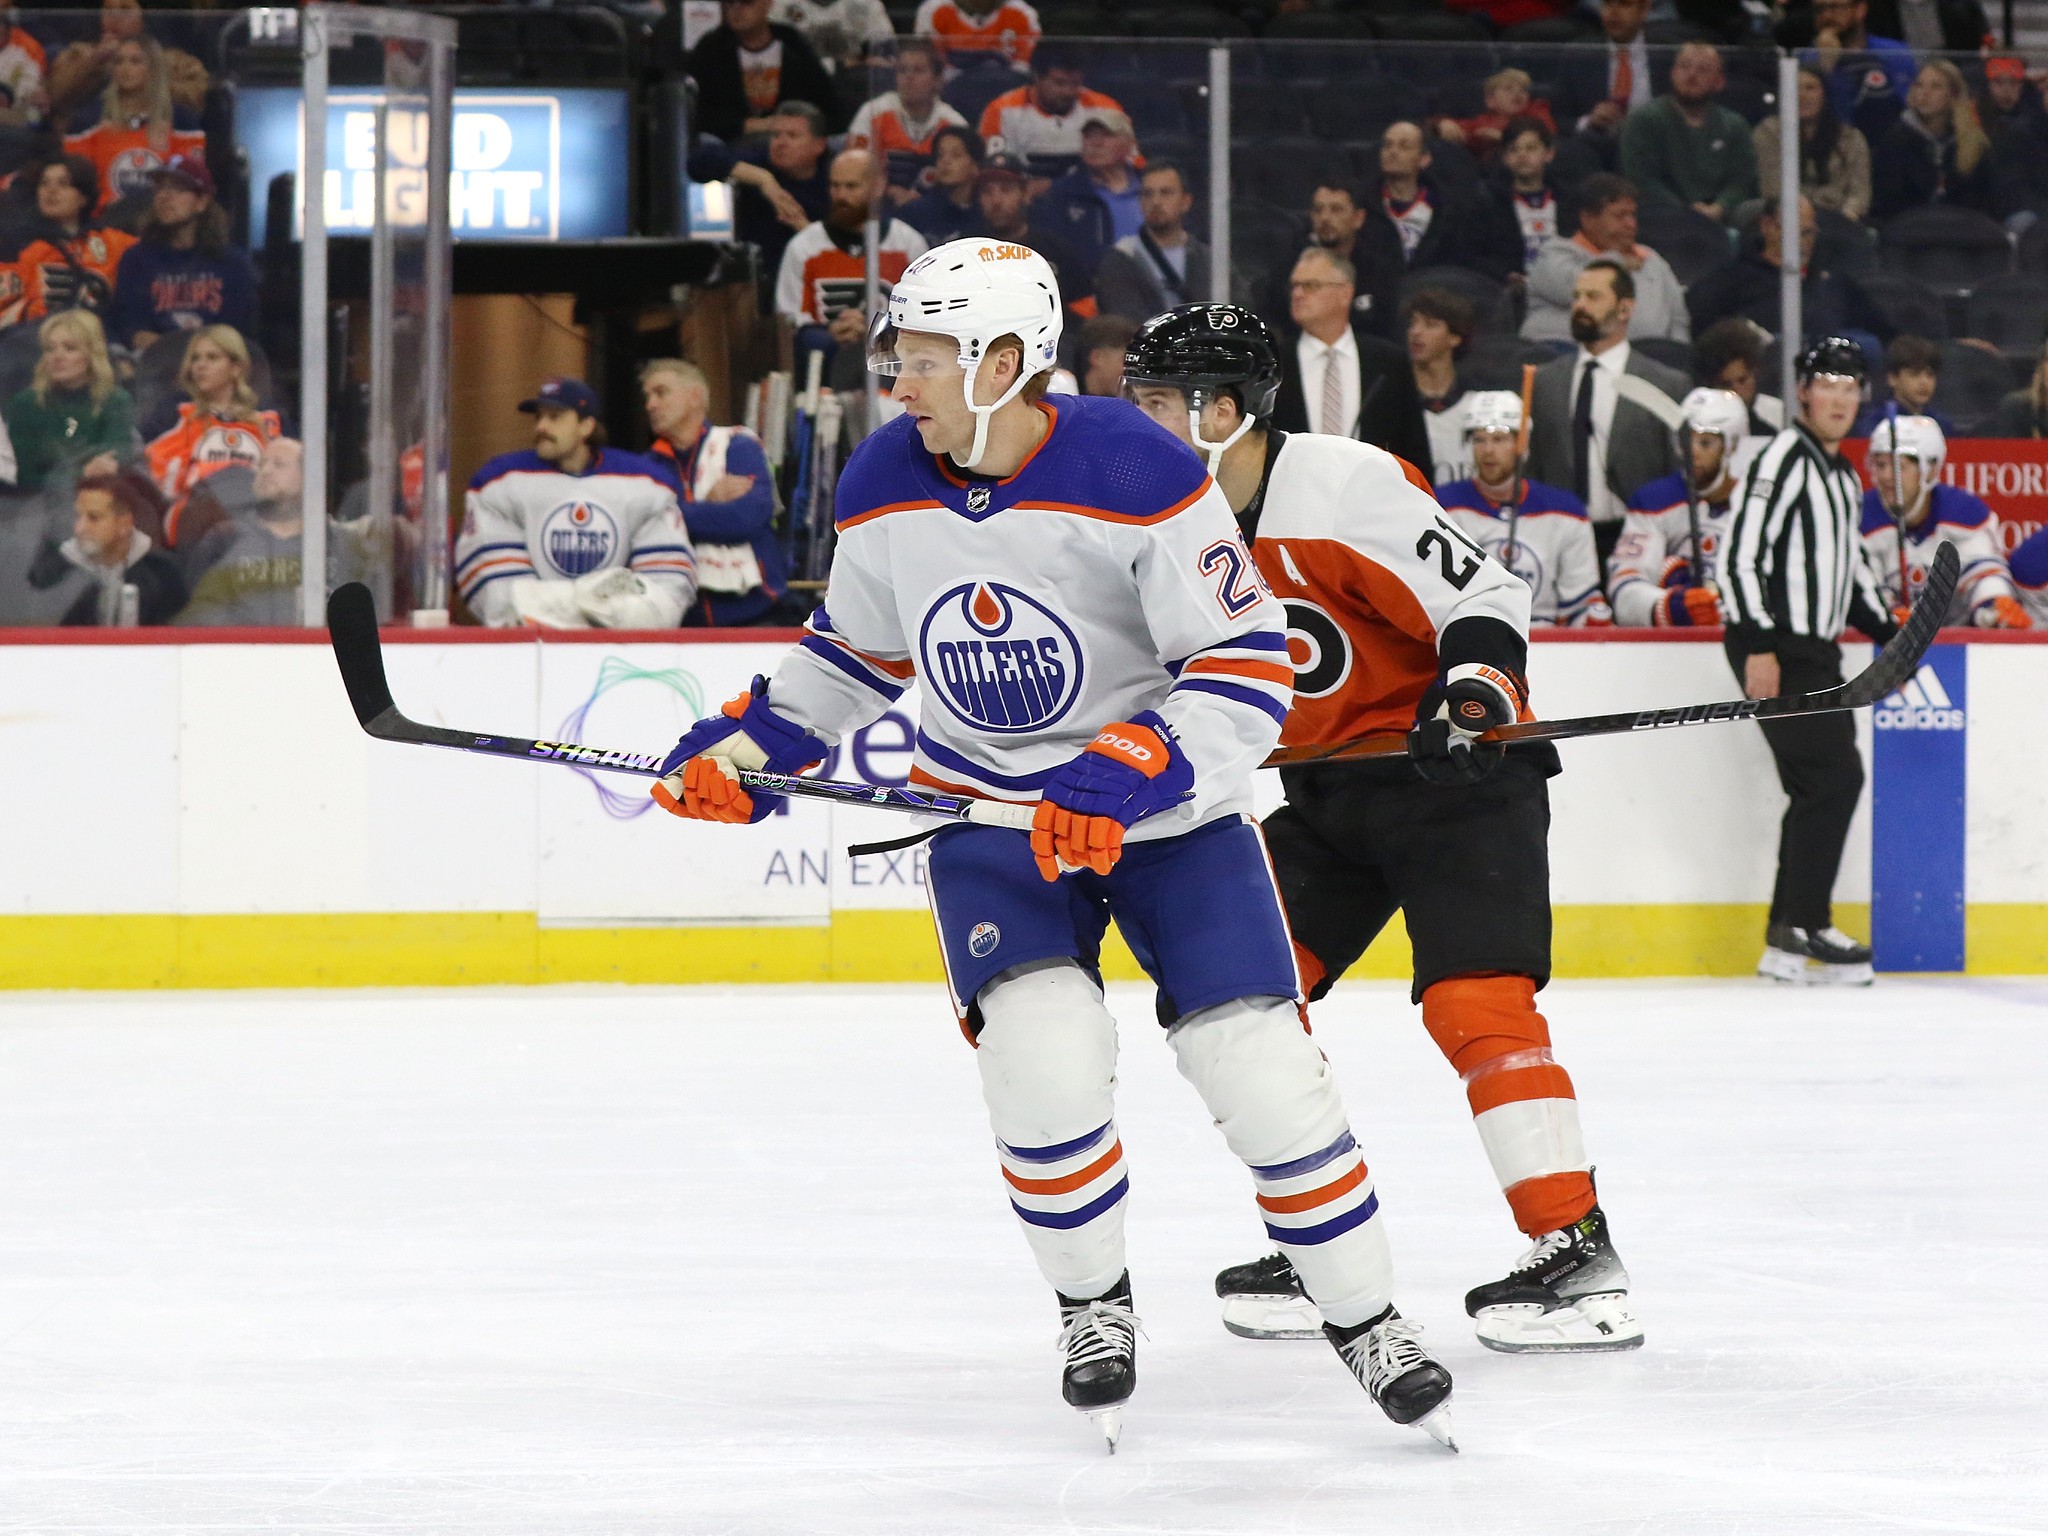 Edmonton Oilers' Holloway Should Not Only Make the Team, But Play Top-6